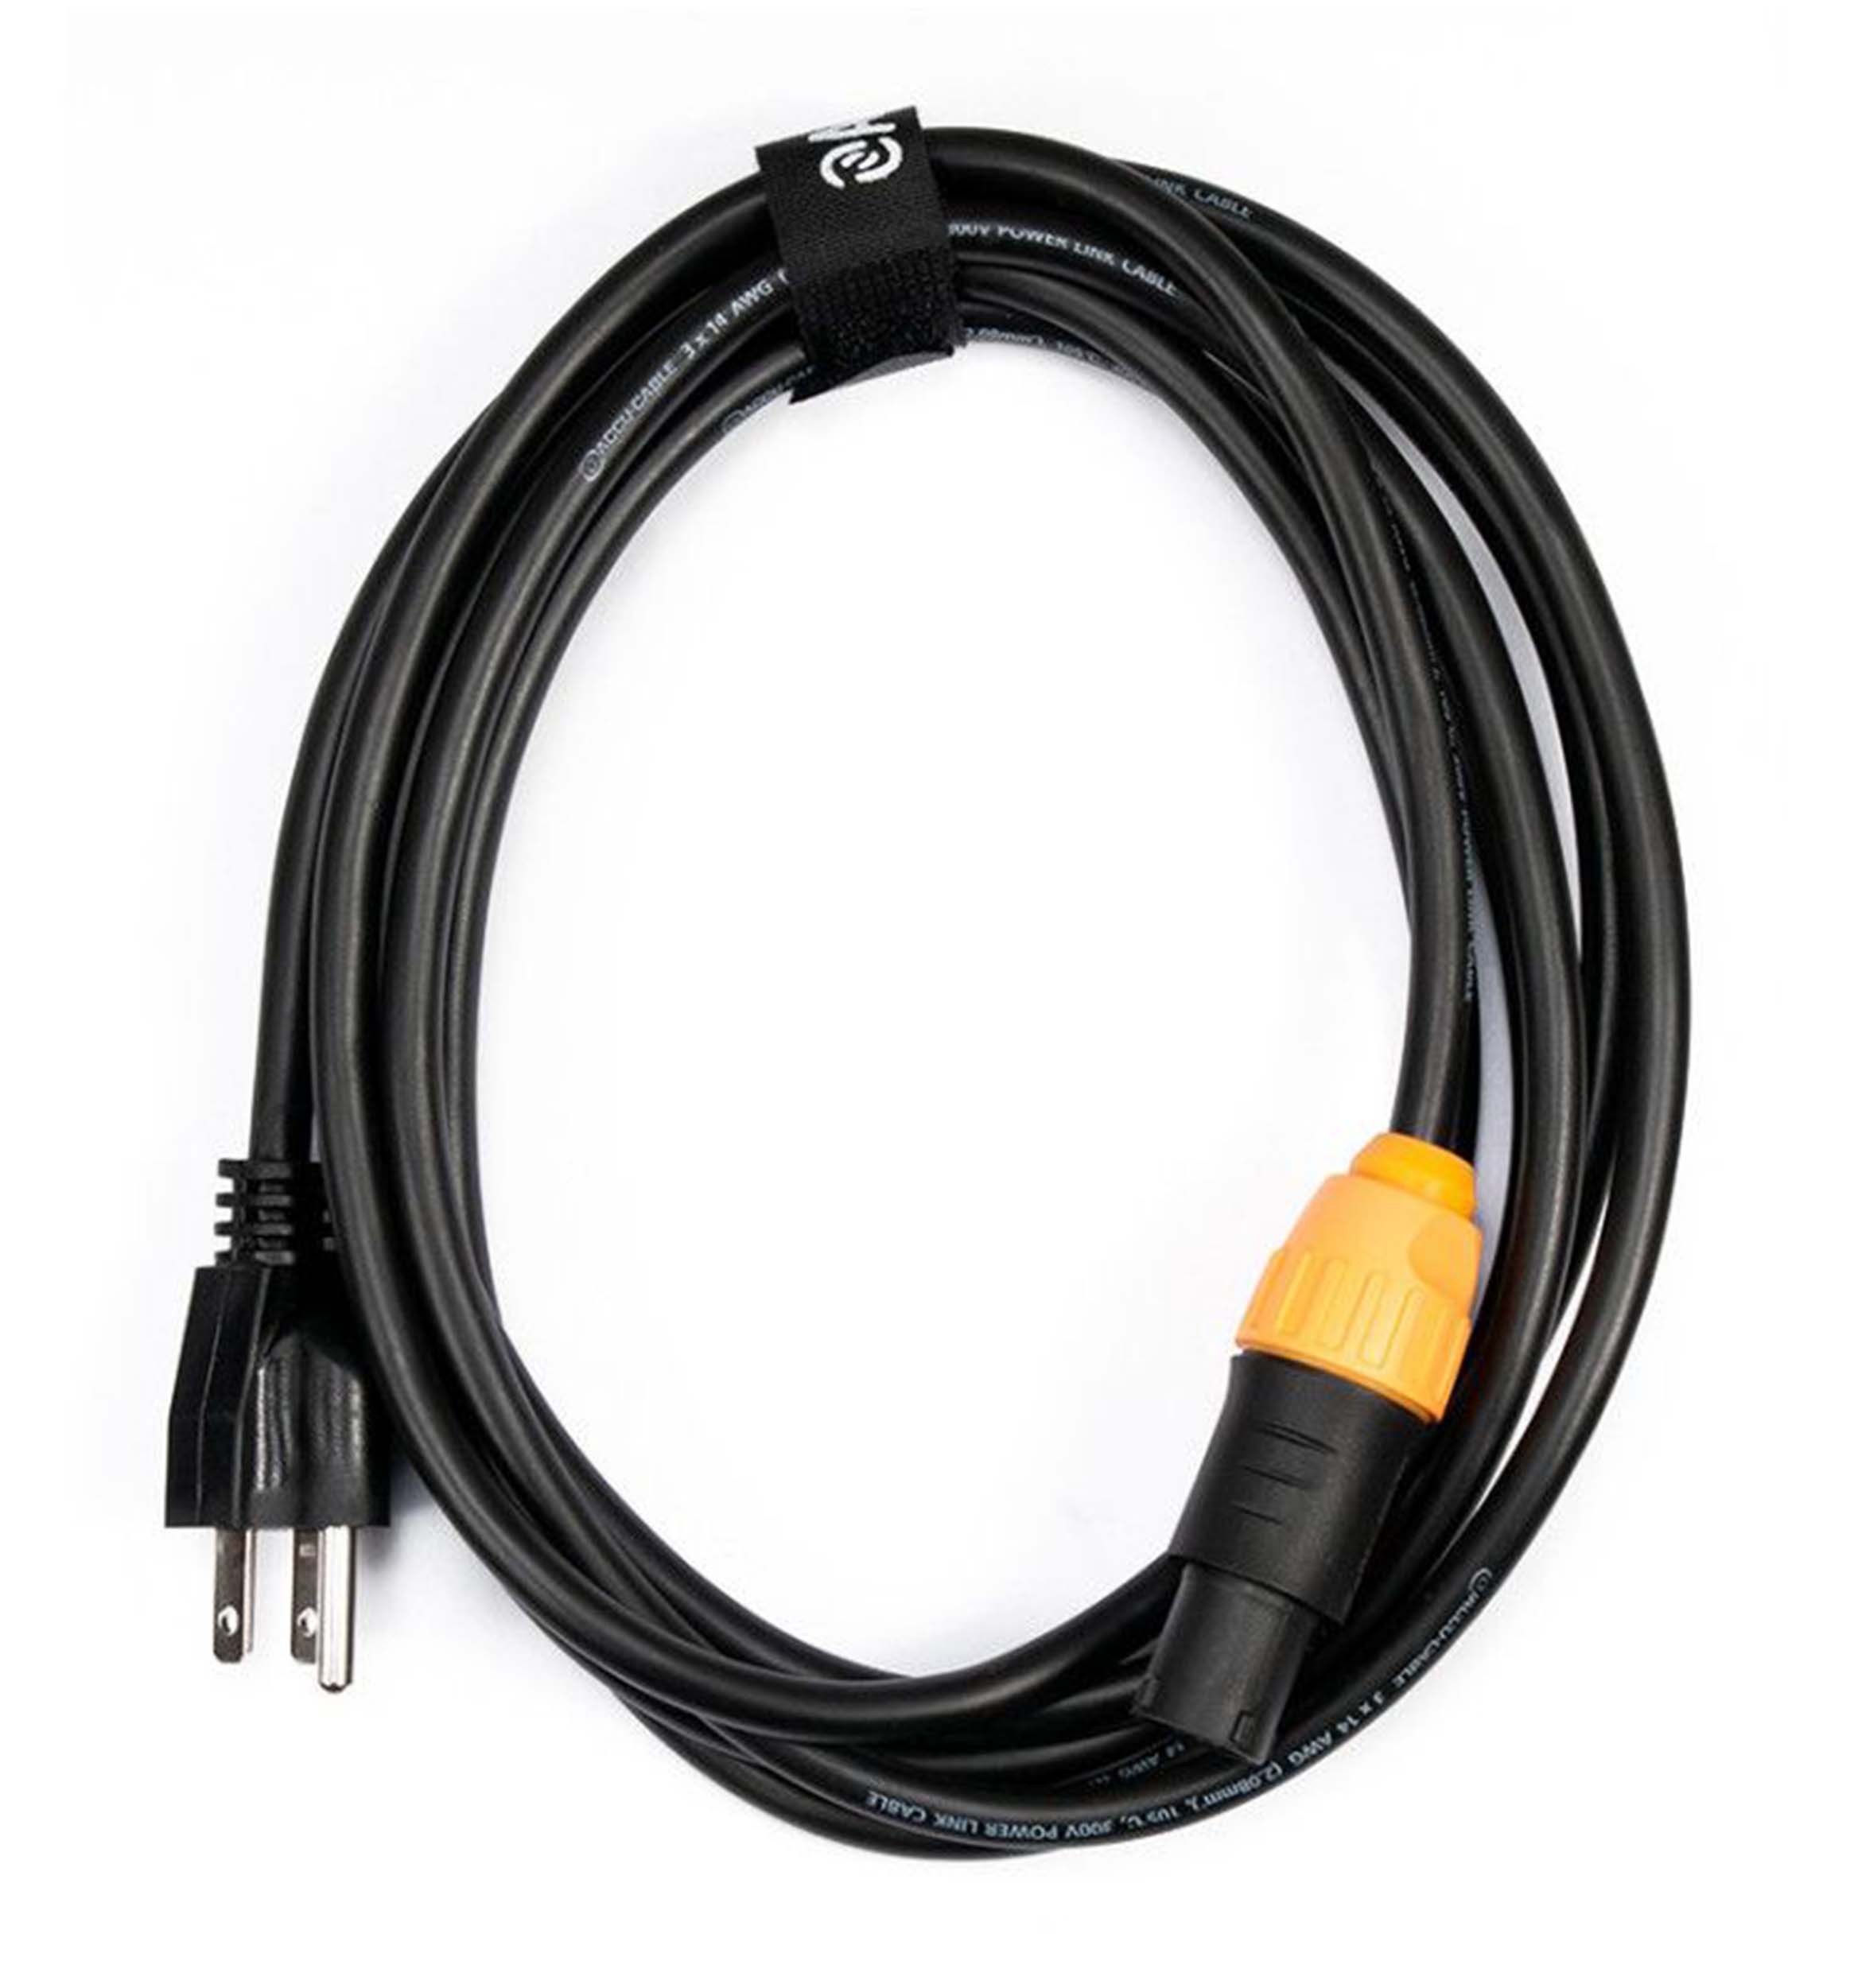 ADJ SIP1MPC10, IP65 Power Link to Edison 3-Prong Power Cable - 10 Ft by ADJ